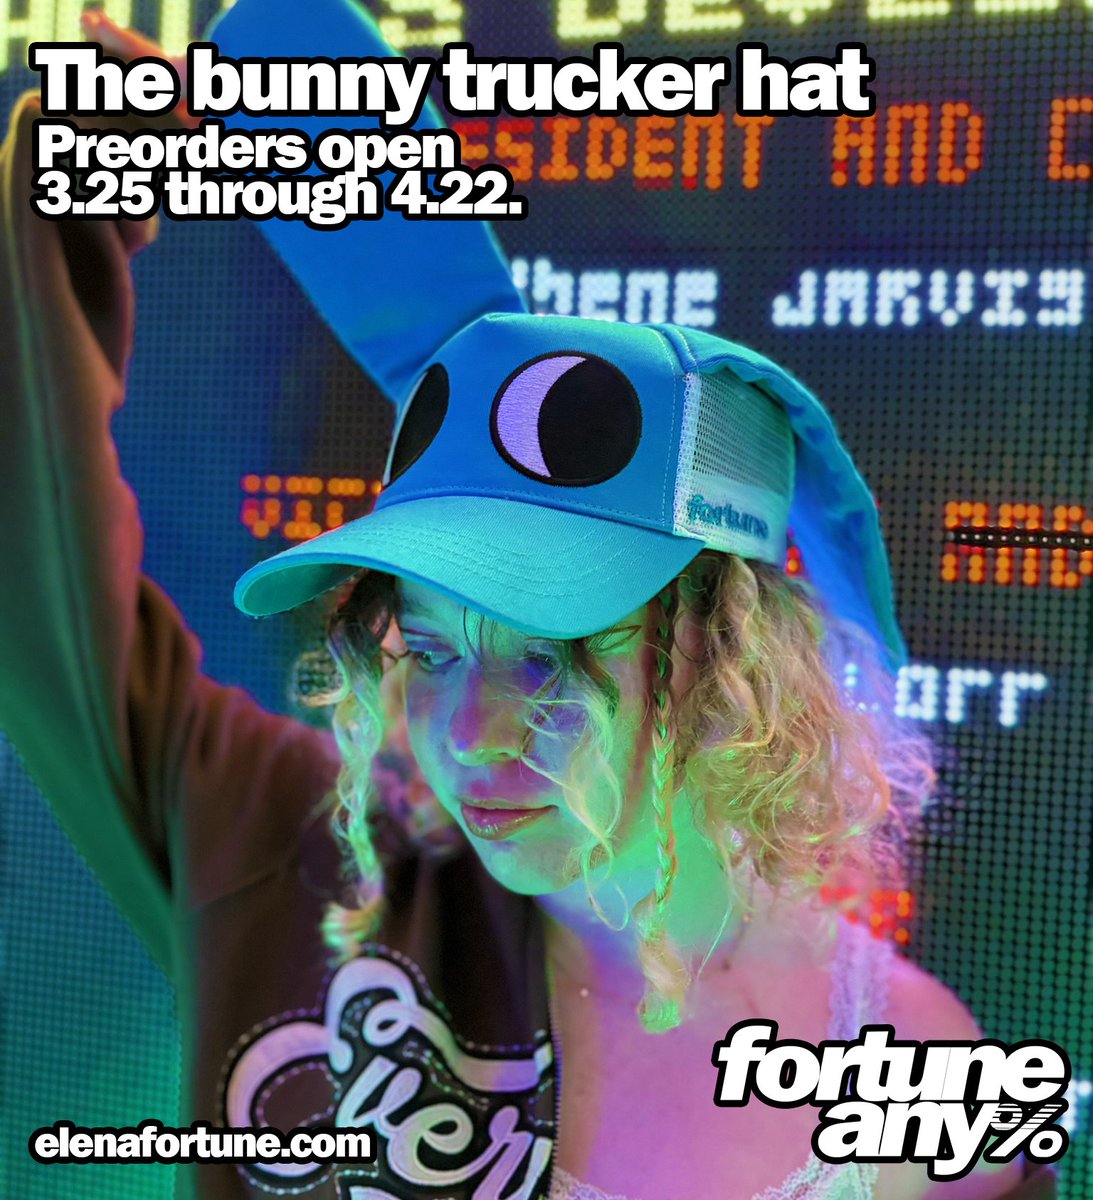 at last... THE BUNNY TRUCKER HAT is opening for preorders on monday!! available in black and blue, each with their own eye shape and ear style!! open thru 4/22, expected to ship early june. im very excited !! :D elenafortune.com